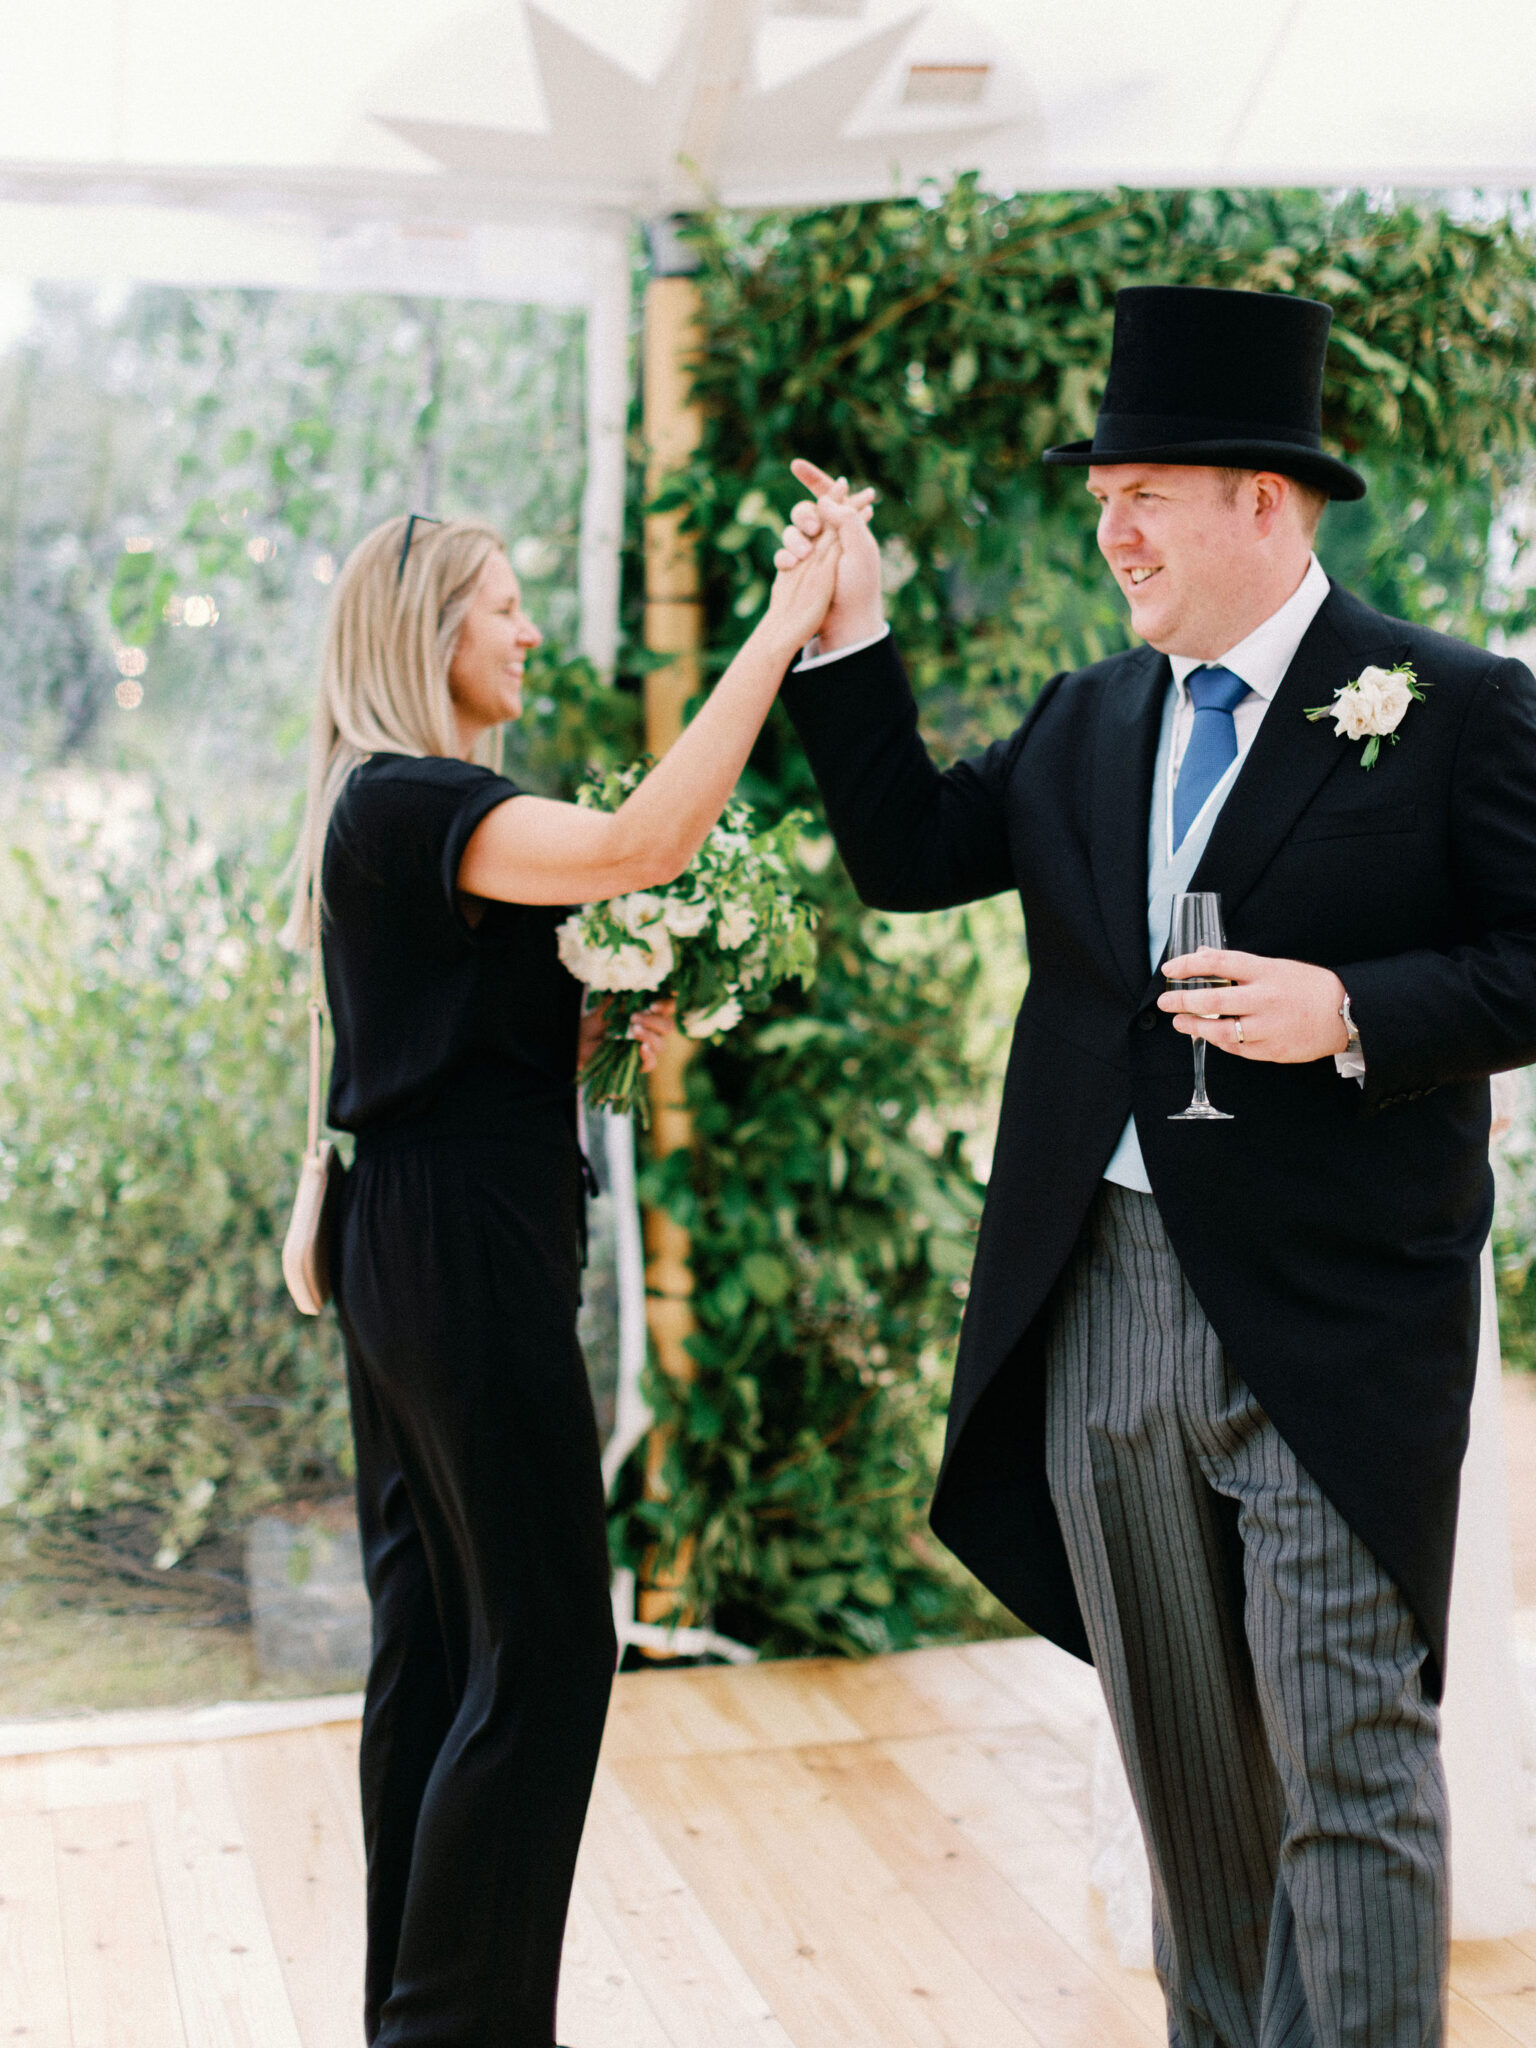 Wedding planner with groom - high five